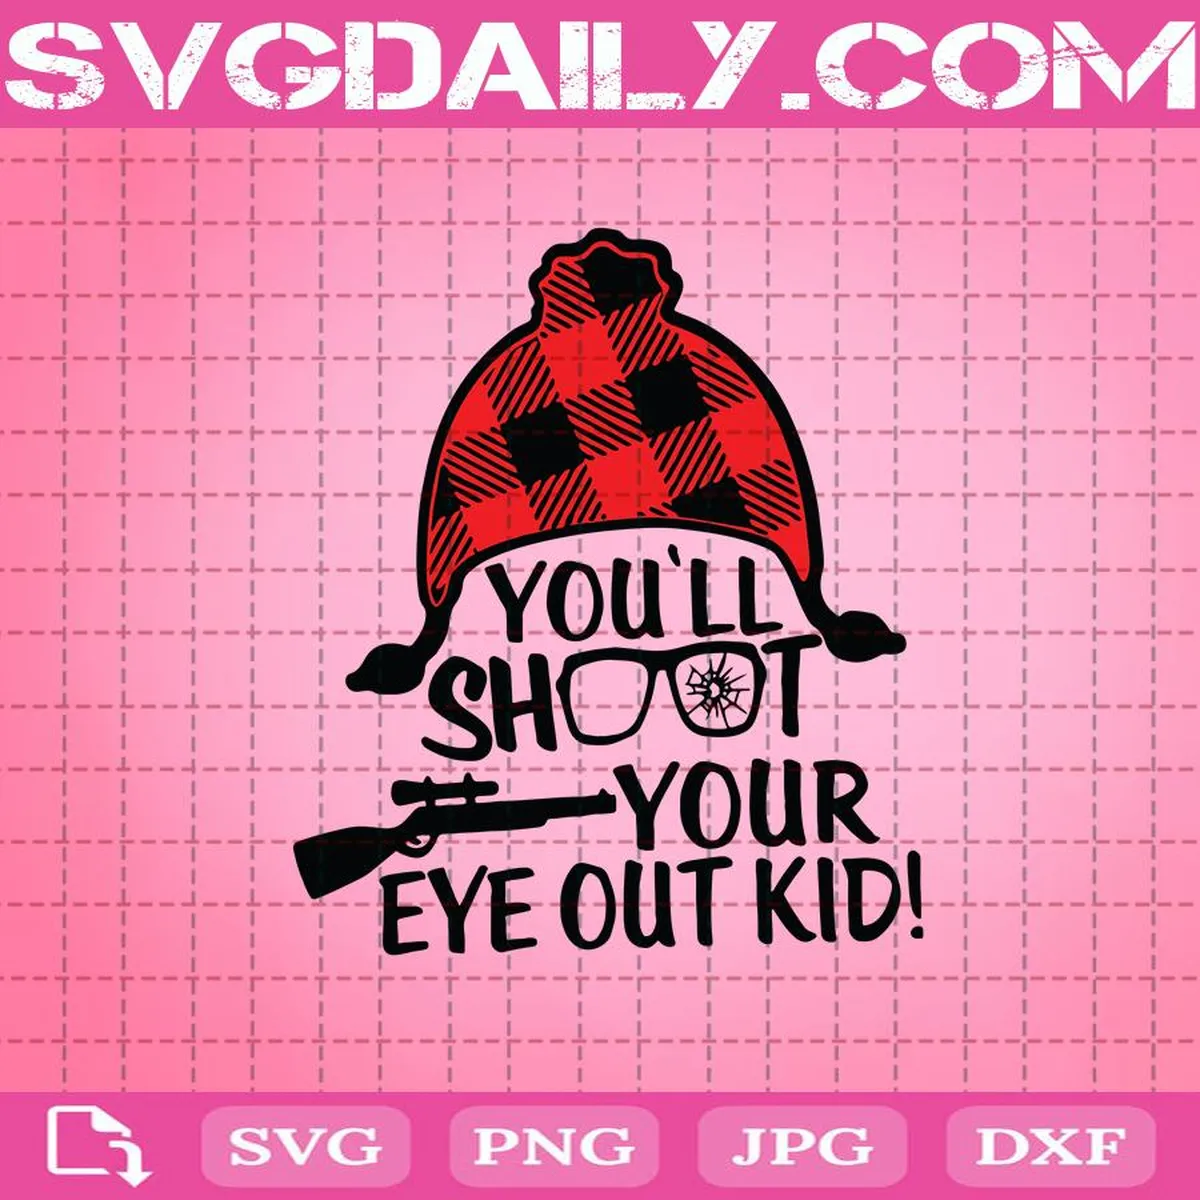 You’ll Shoot Your Eye Out Kid Svg, Buffalo Plaid Hat Svg, Christmas Svg, Buffalo Plaid Svg, Funny Christmas Svg